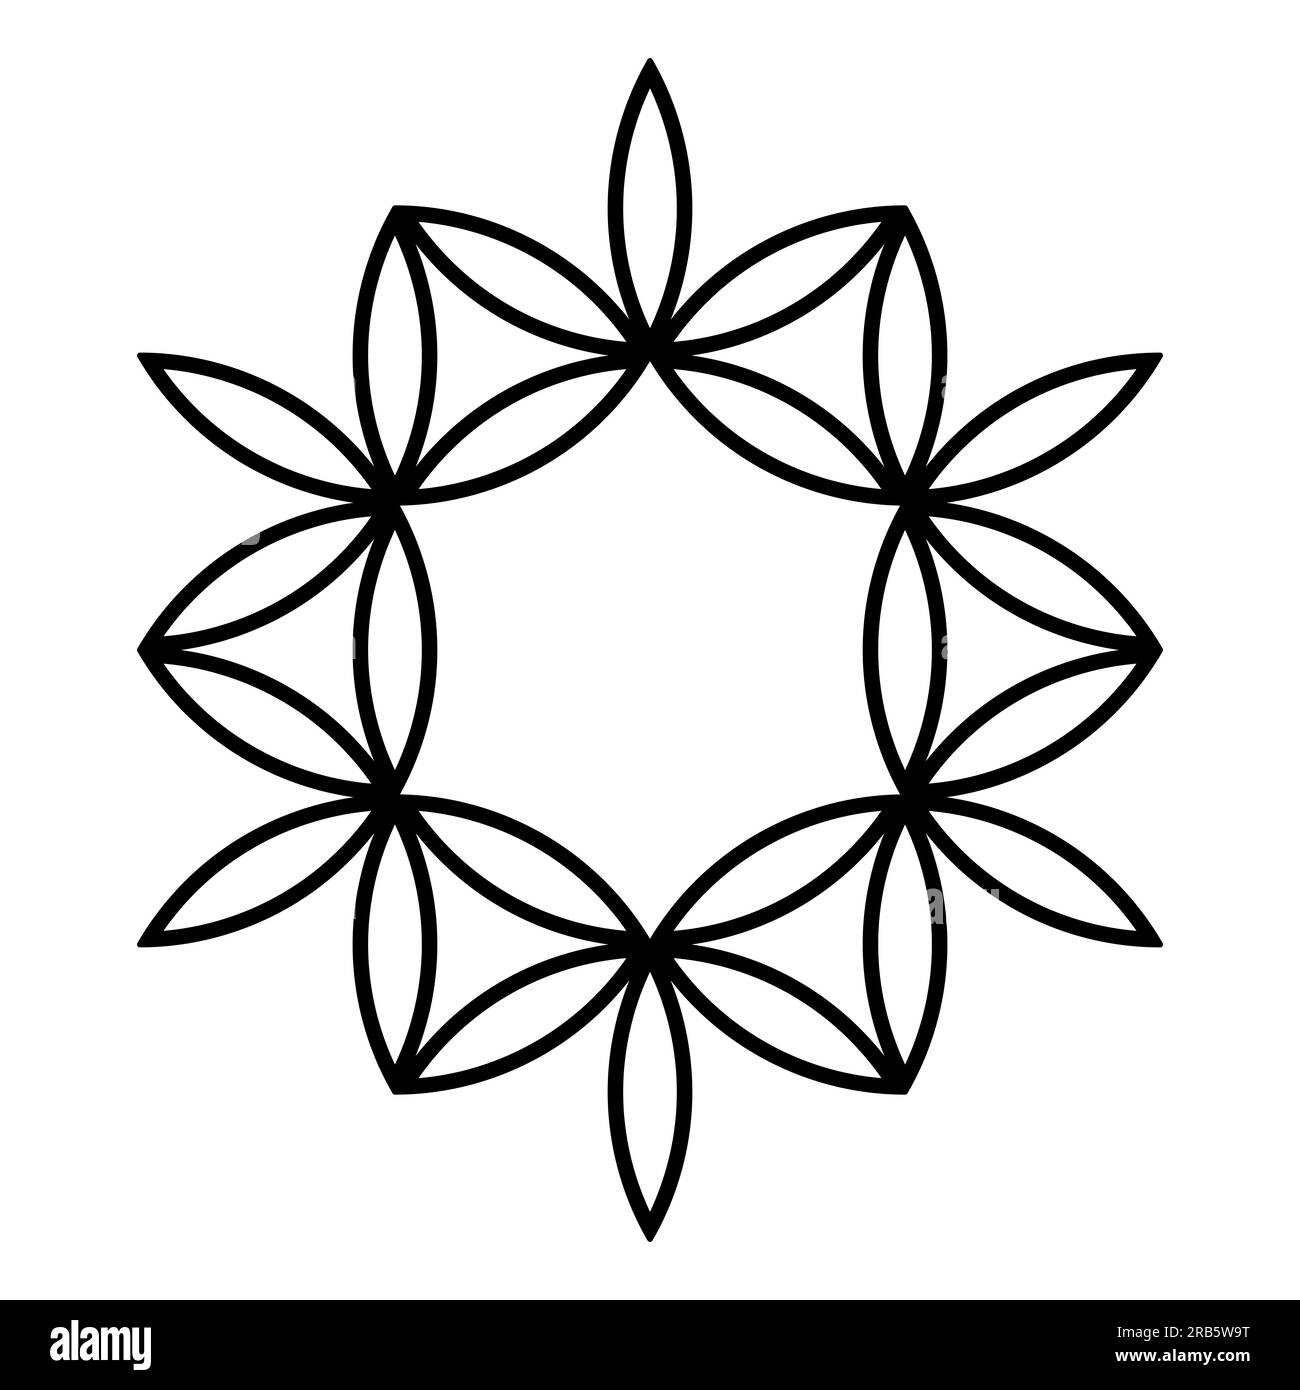 Symbol and pattern, resembling a flower. Vesica piscis shaped lenses, derived from a Flower of Life, creating a 12-pointed star. Stock Photo